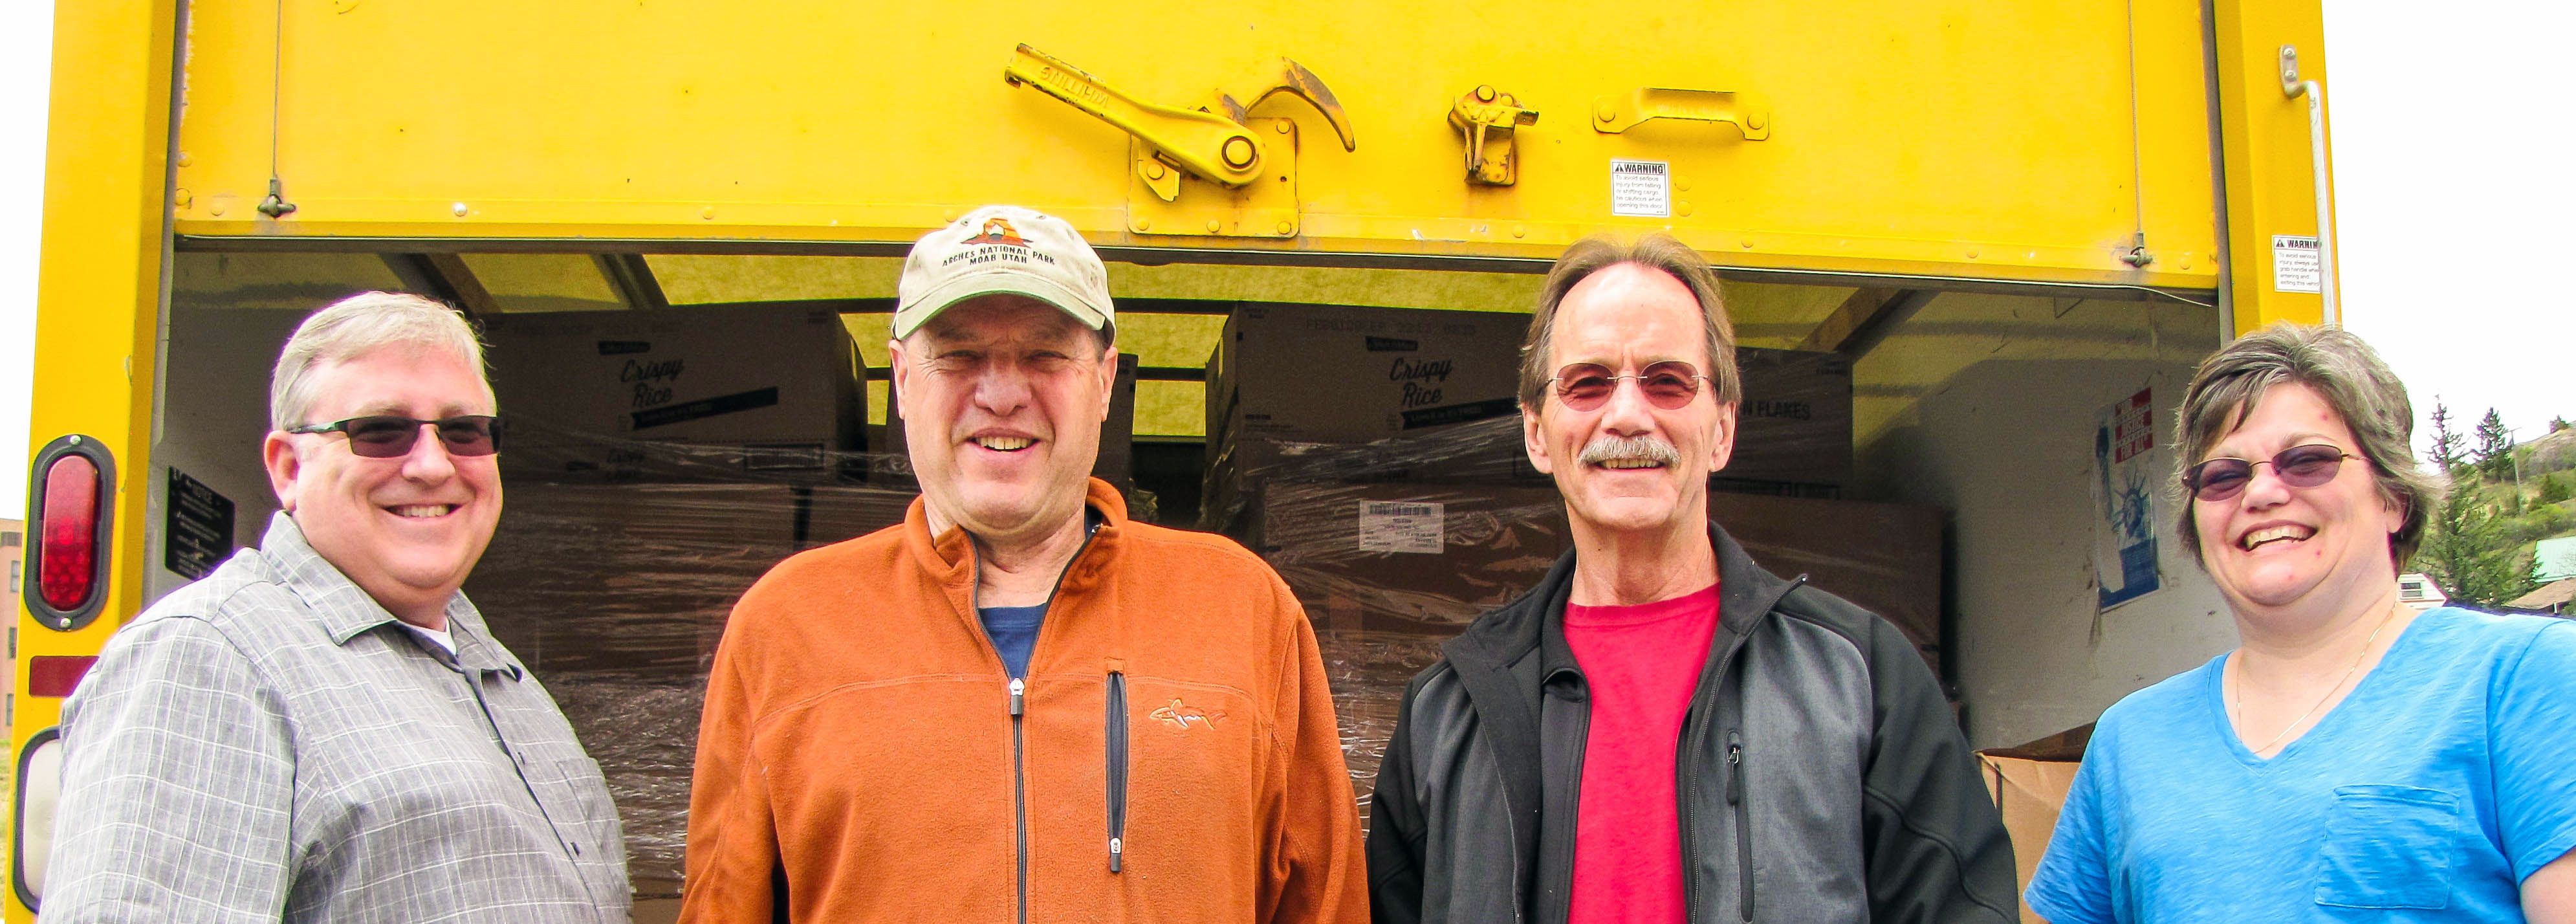 Pictured: Larry and Walter distributing senior commodities in Boulder, Montana. 